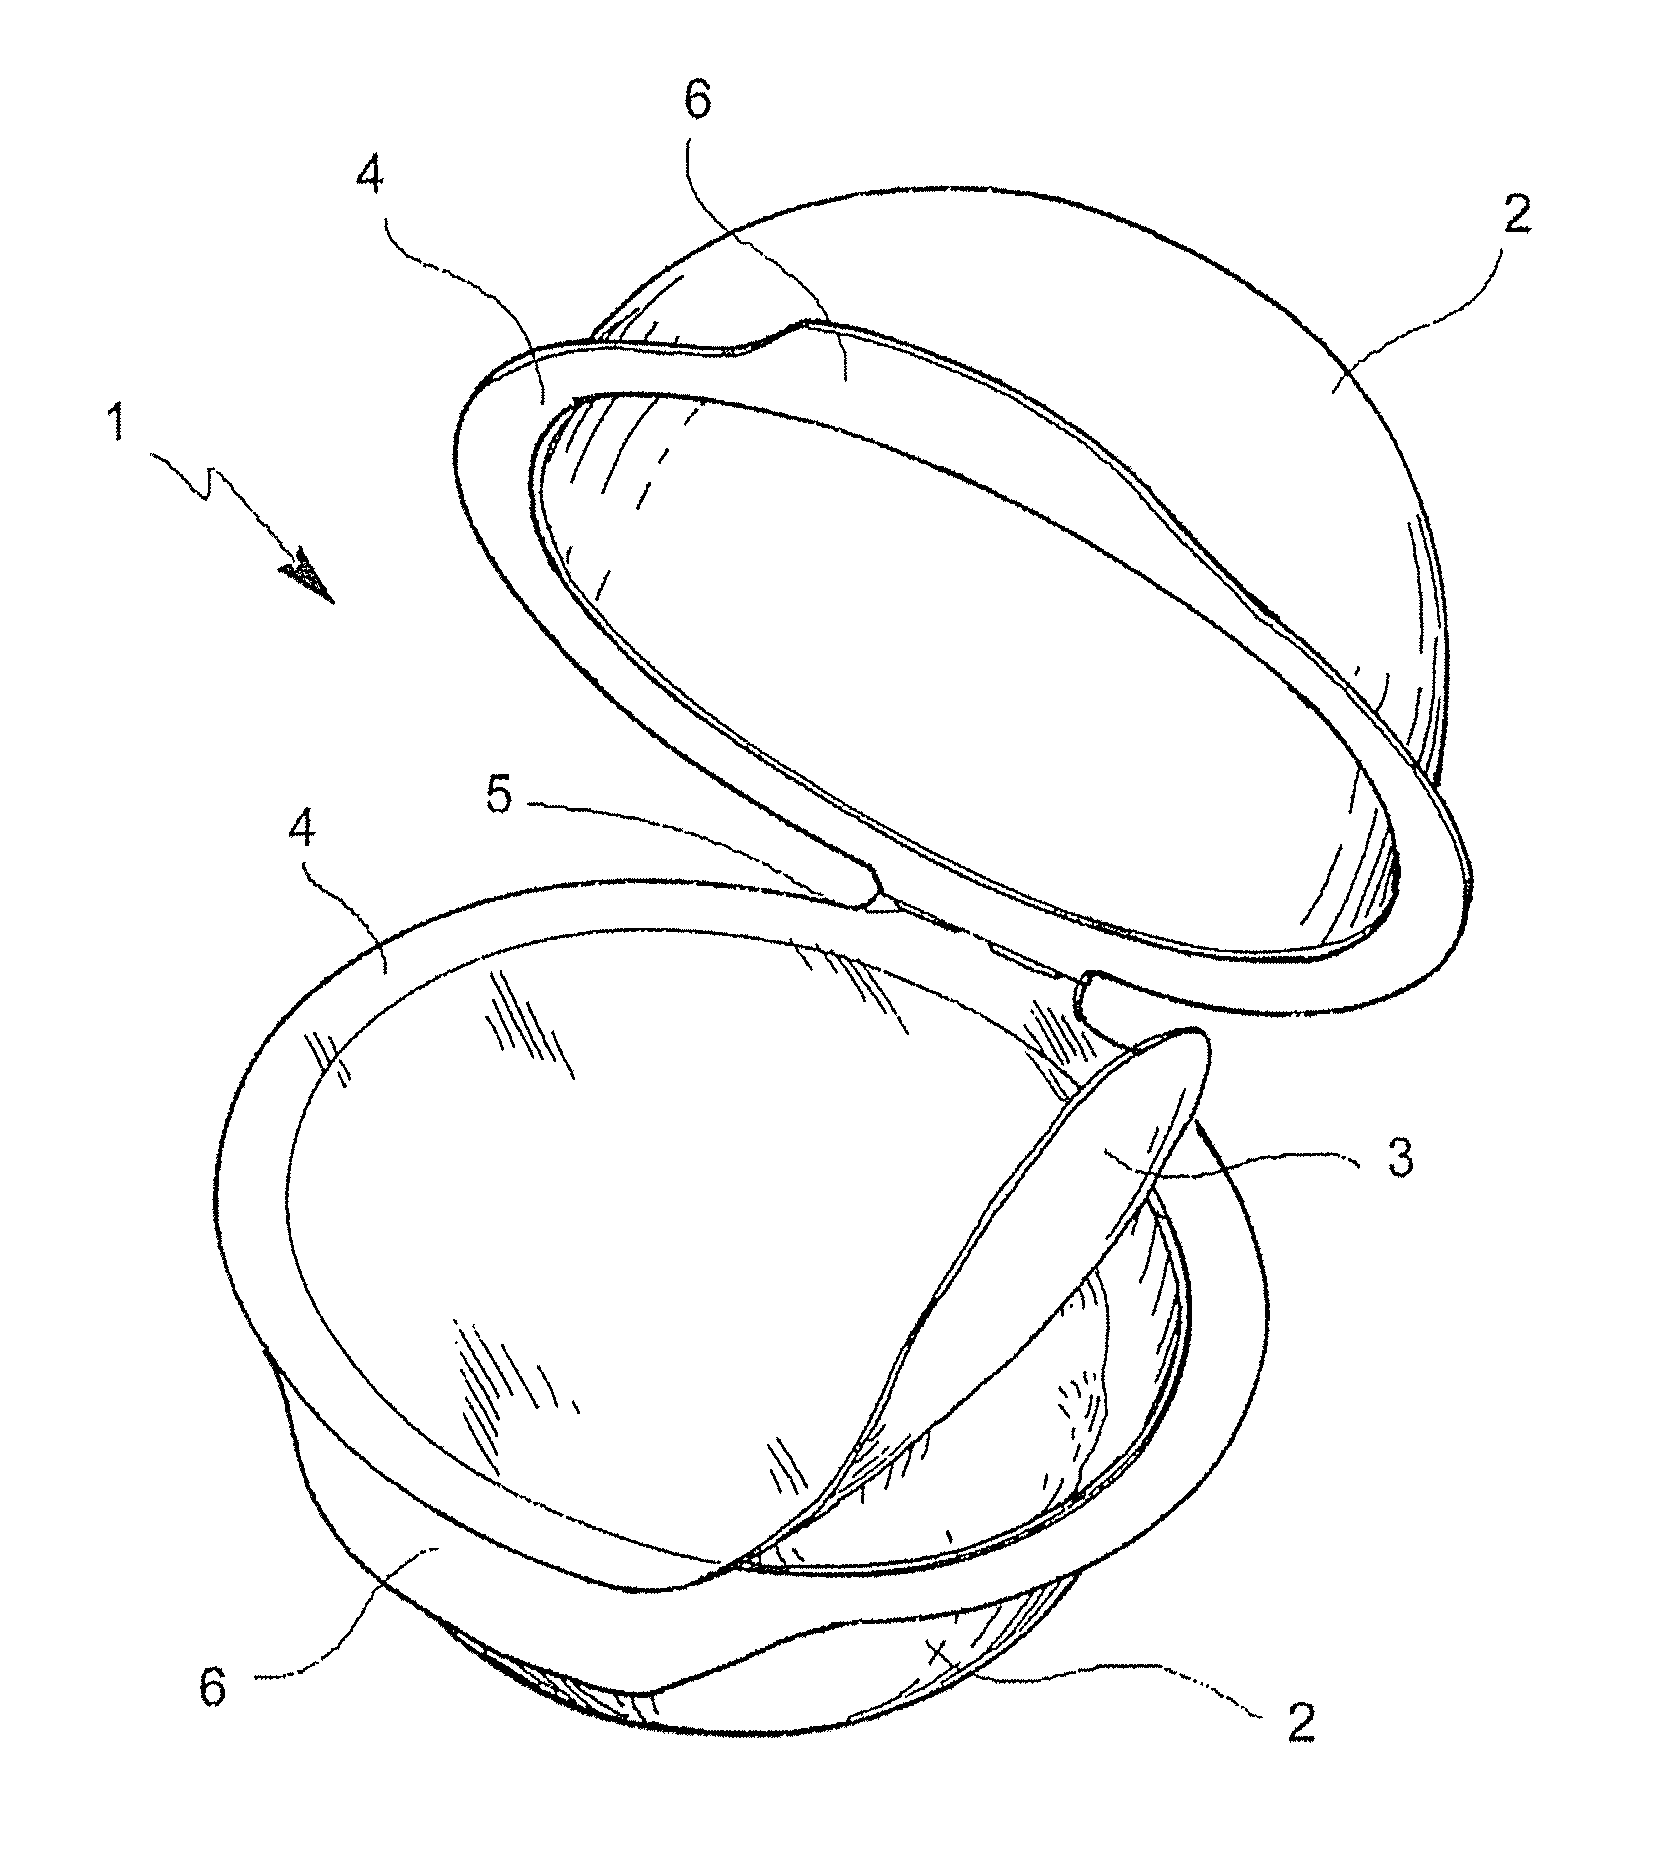 Method for producing a dairy product and system for packaging the same